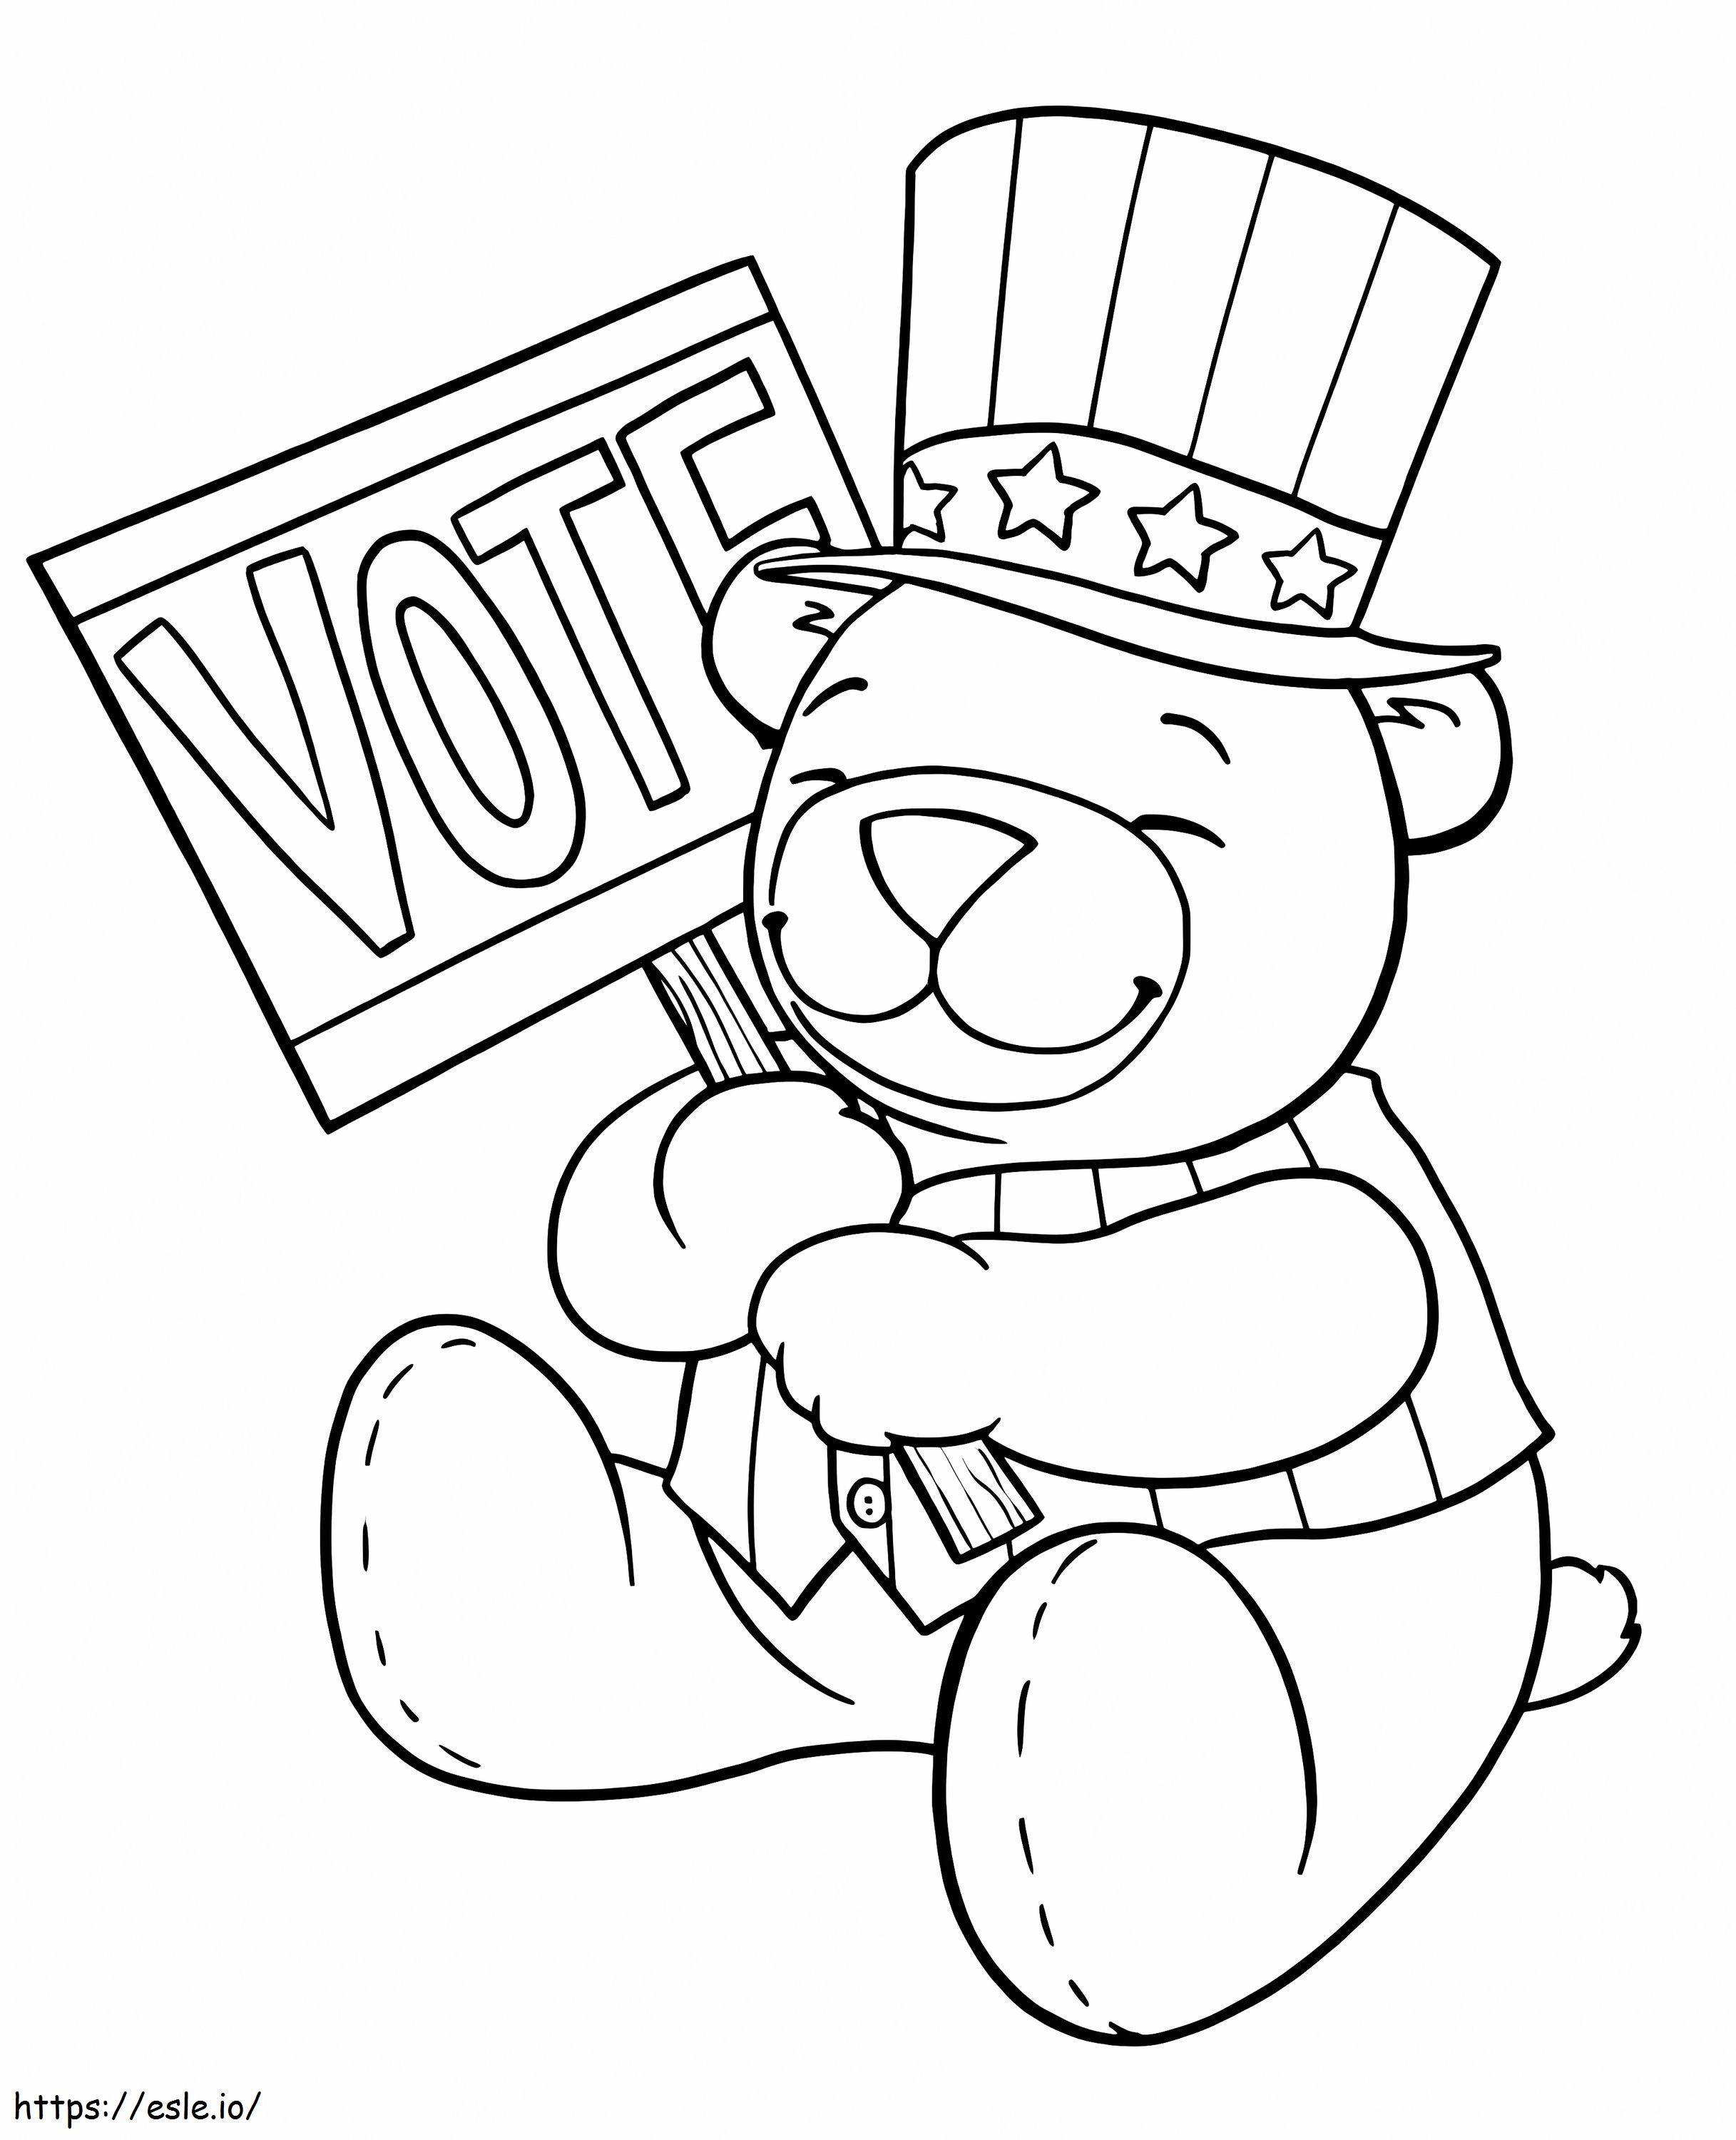 Election Day Vote Bear coloring page